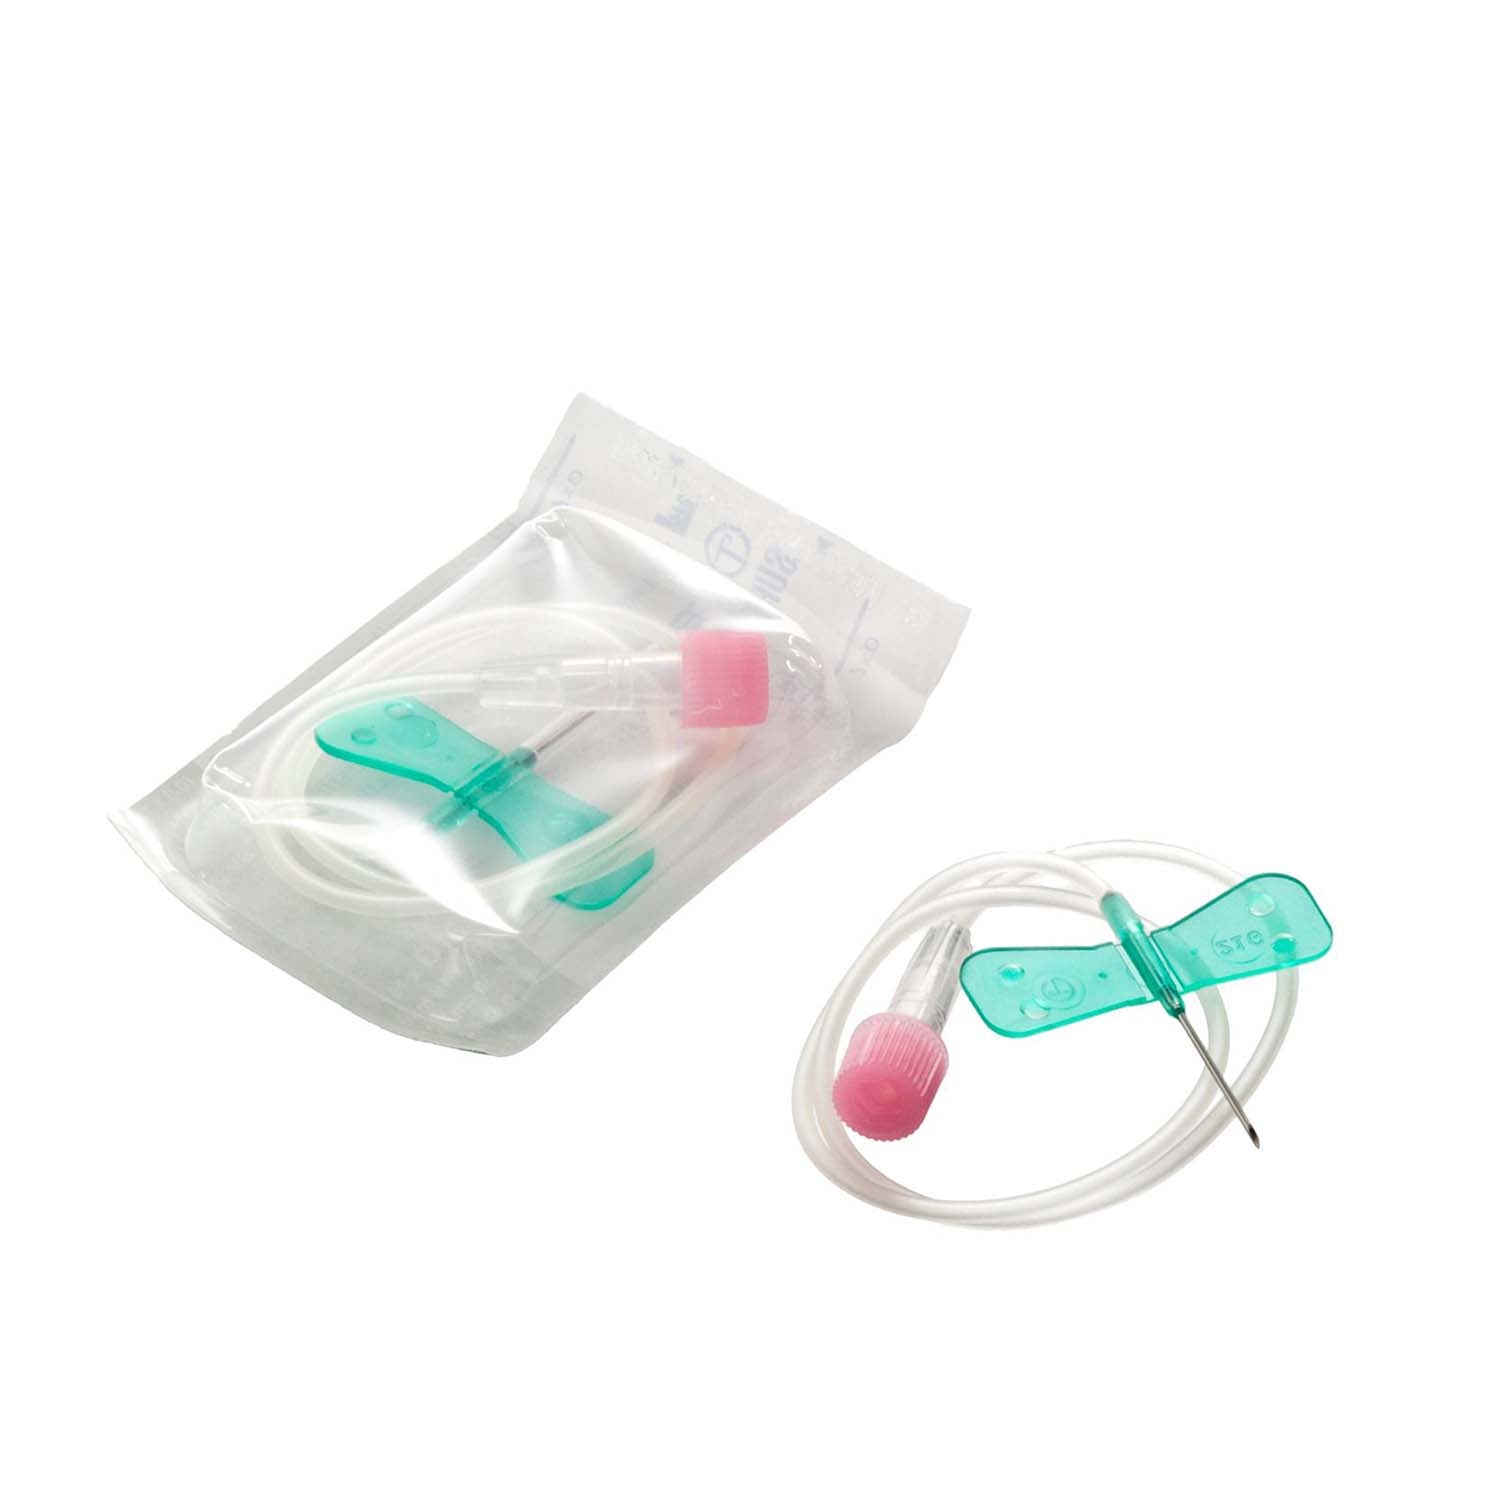 Surflo Winged IV Cannula | Green 21G x 19mm | Pack of 50 (1)